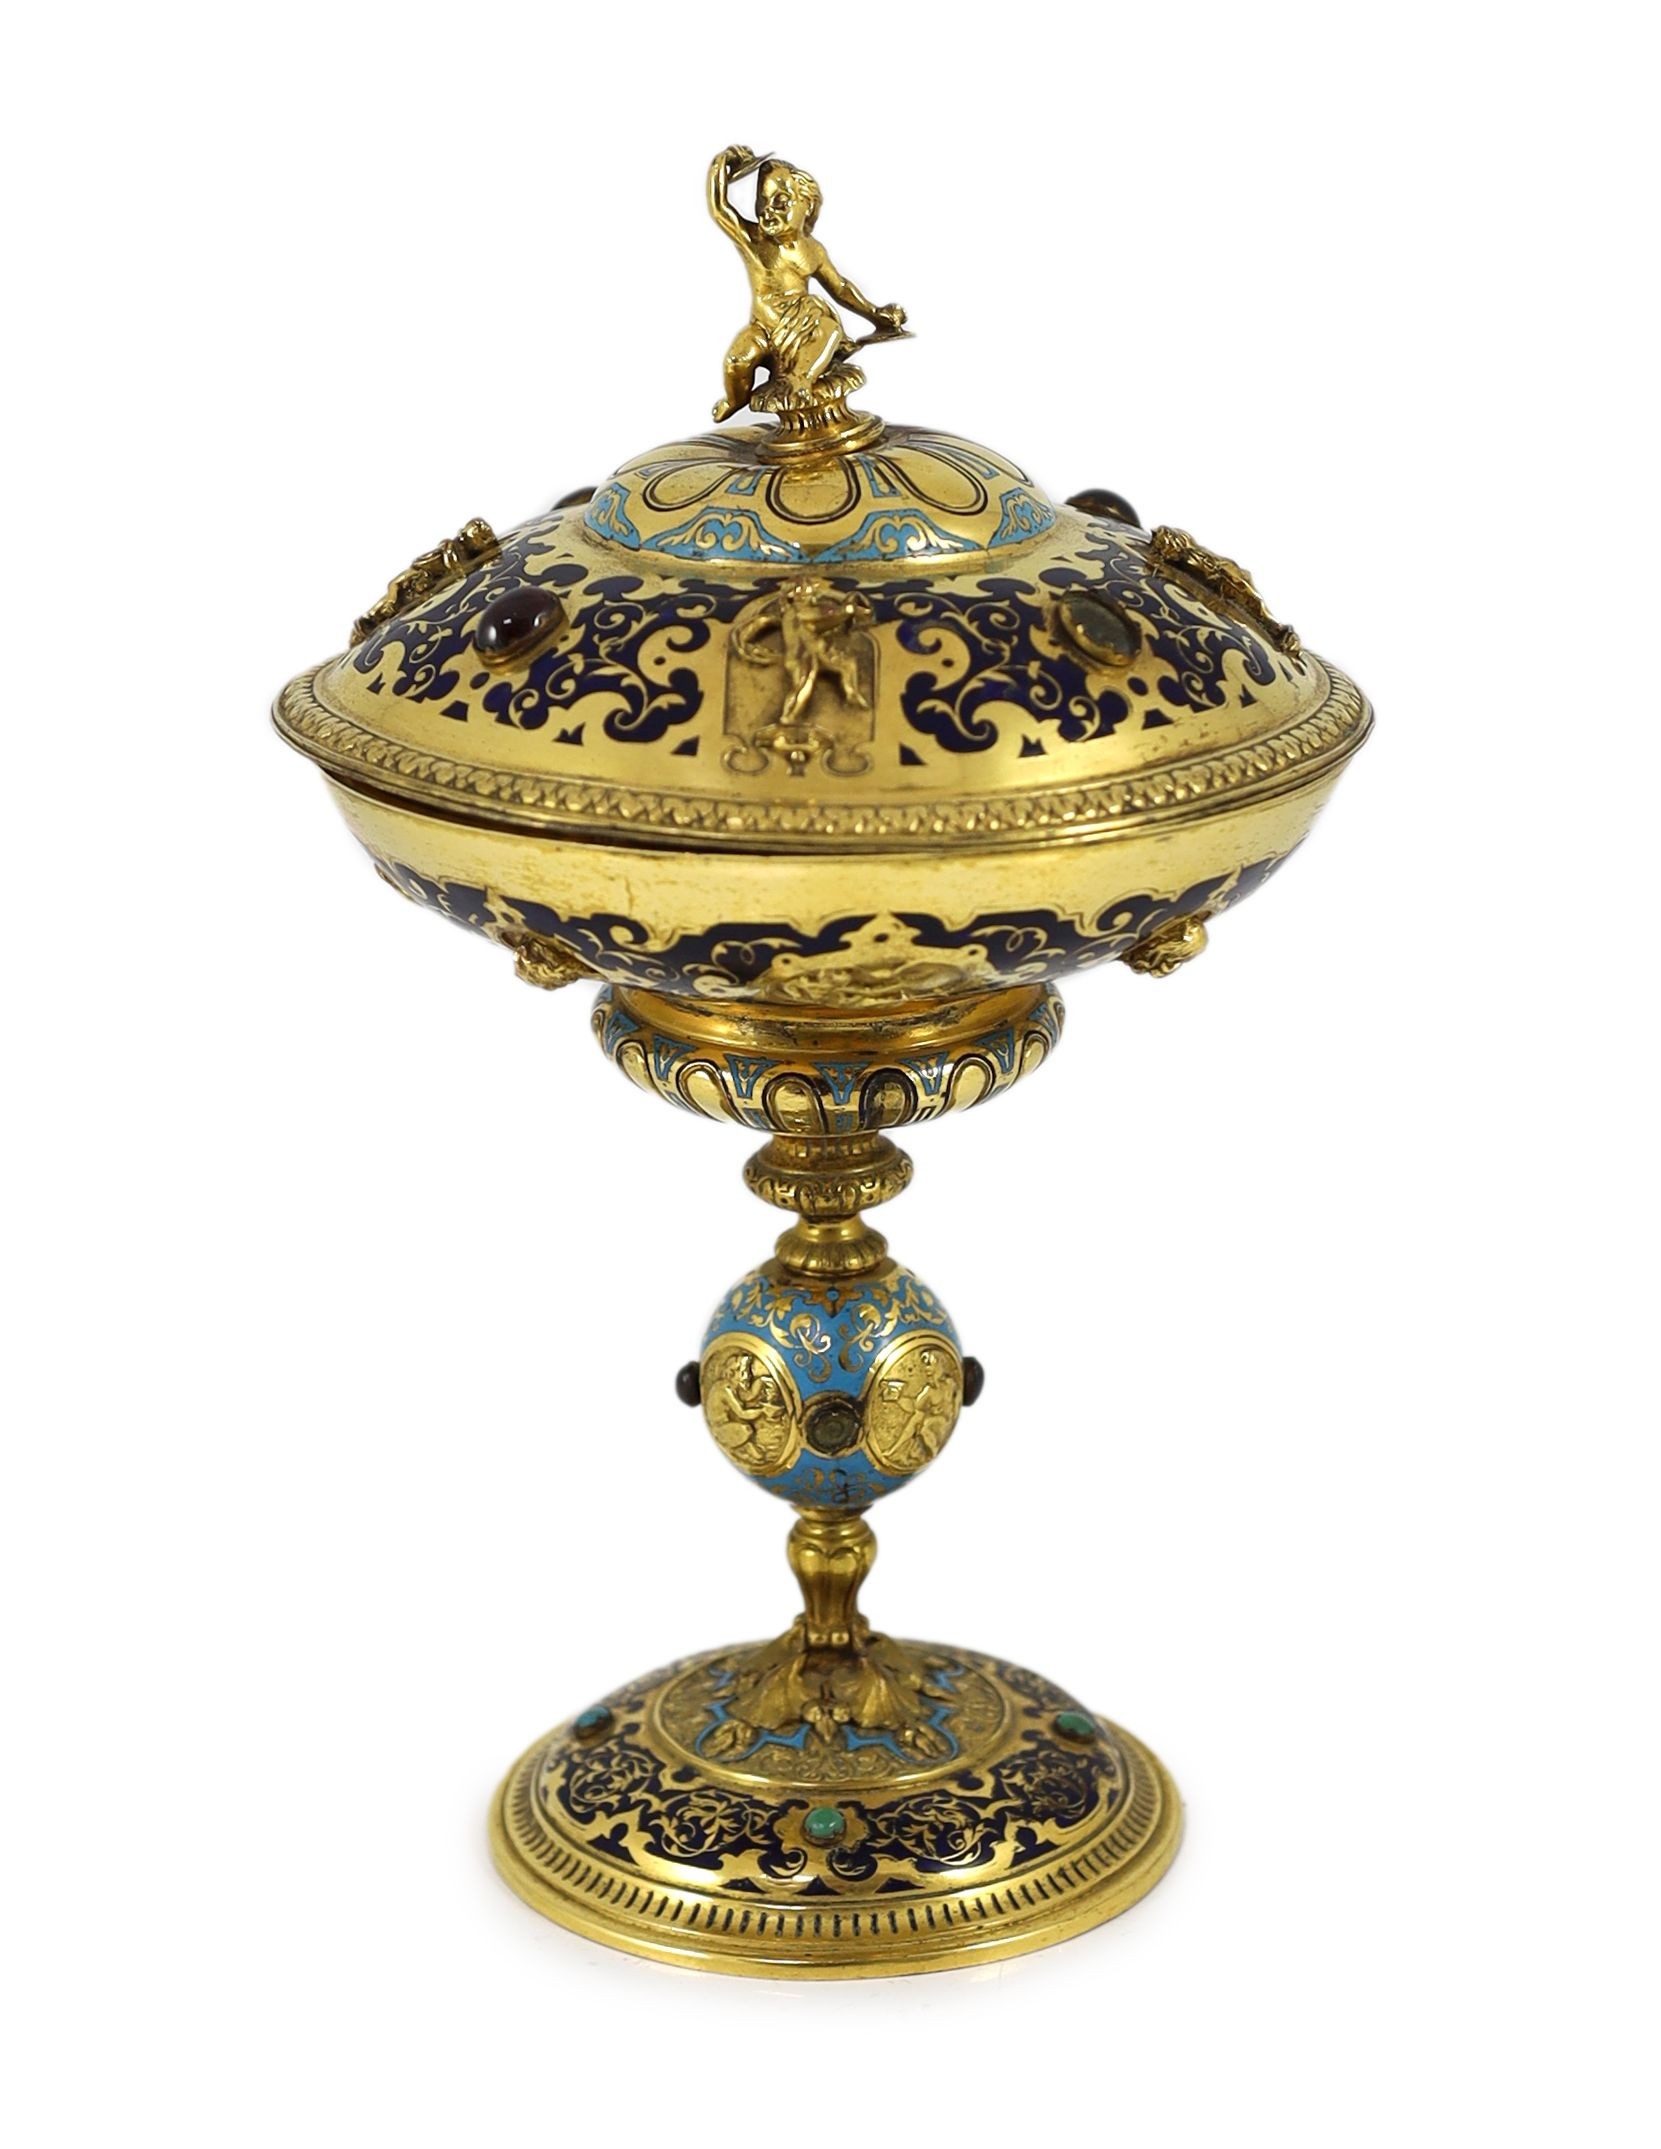 A Victorian enamel and gilt metal pedestal cup and cover in the Renaissance style, Elkington & Co, circa 1880, 24cm high, 14.5cm diameter.